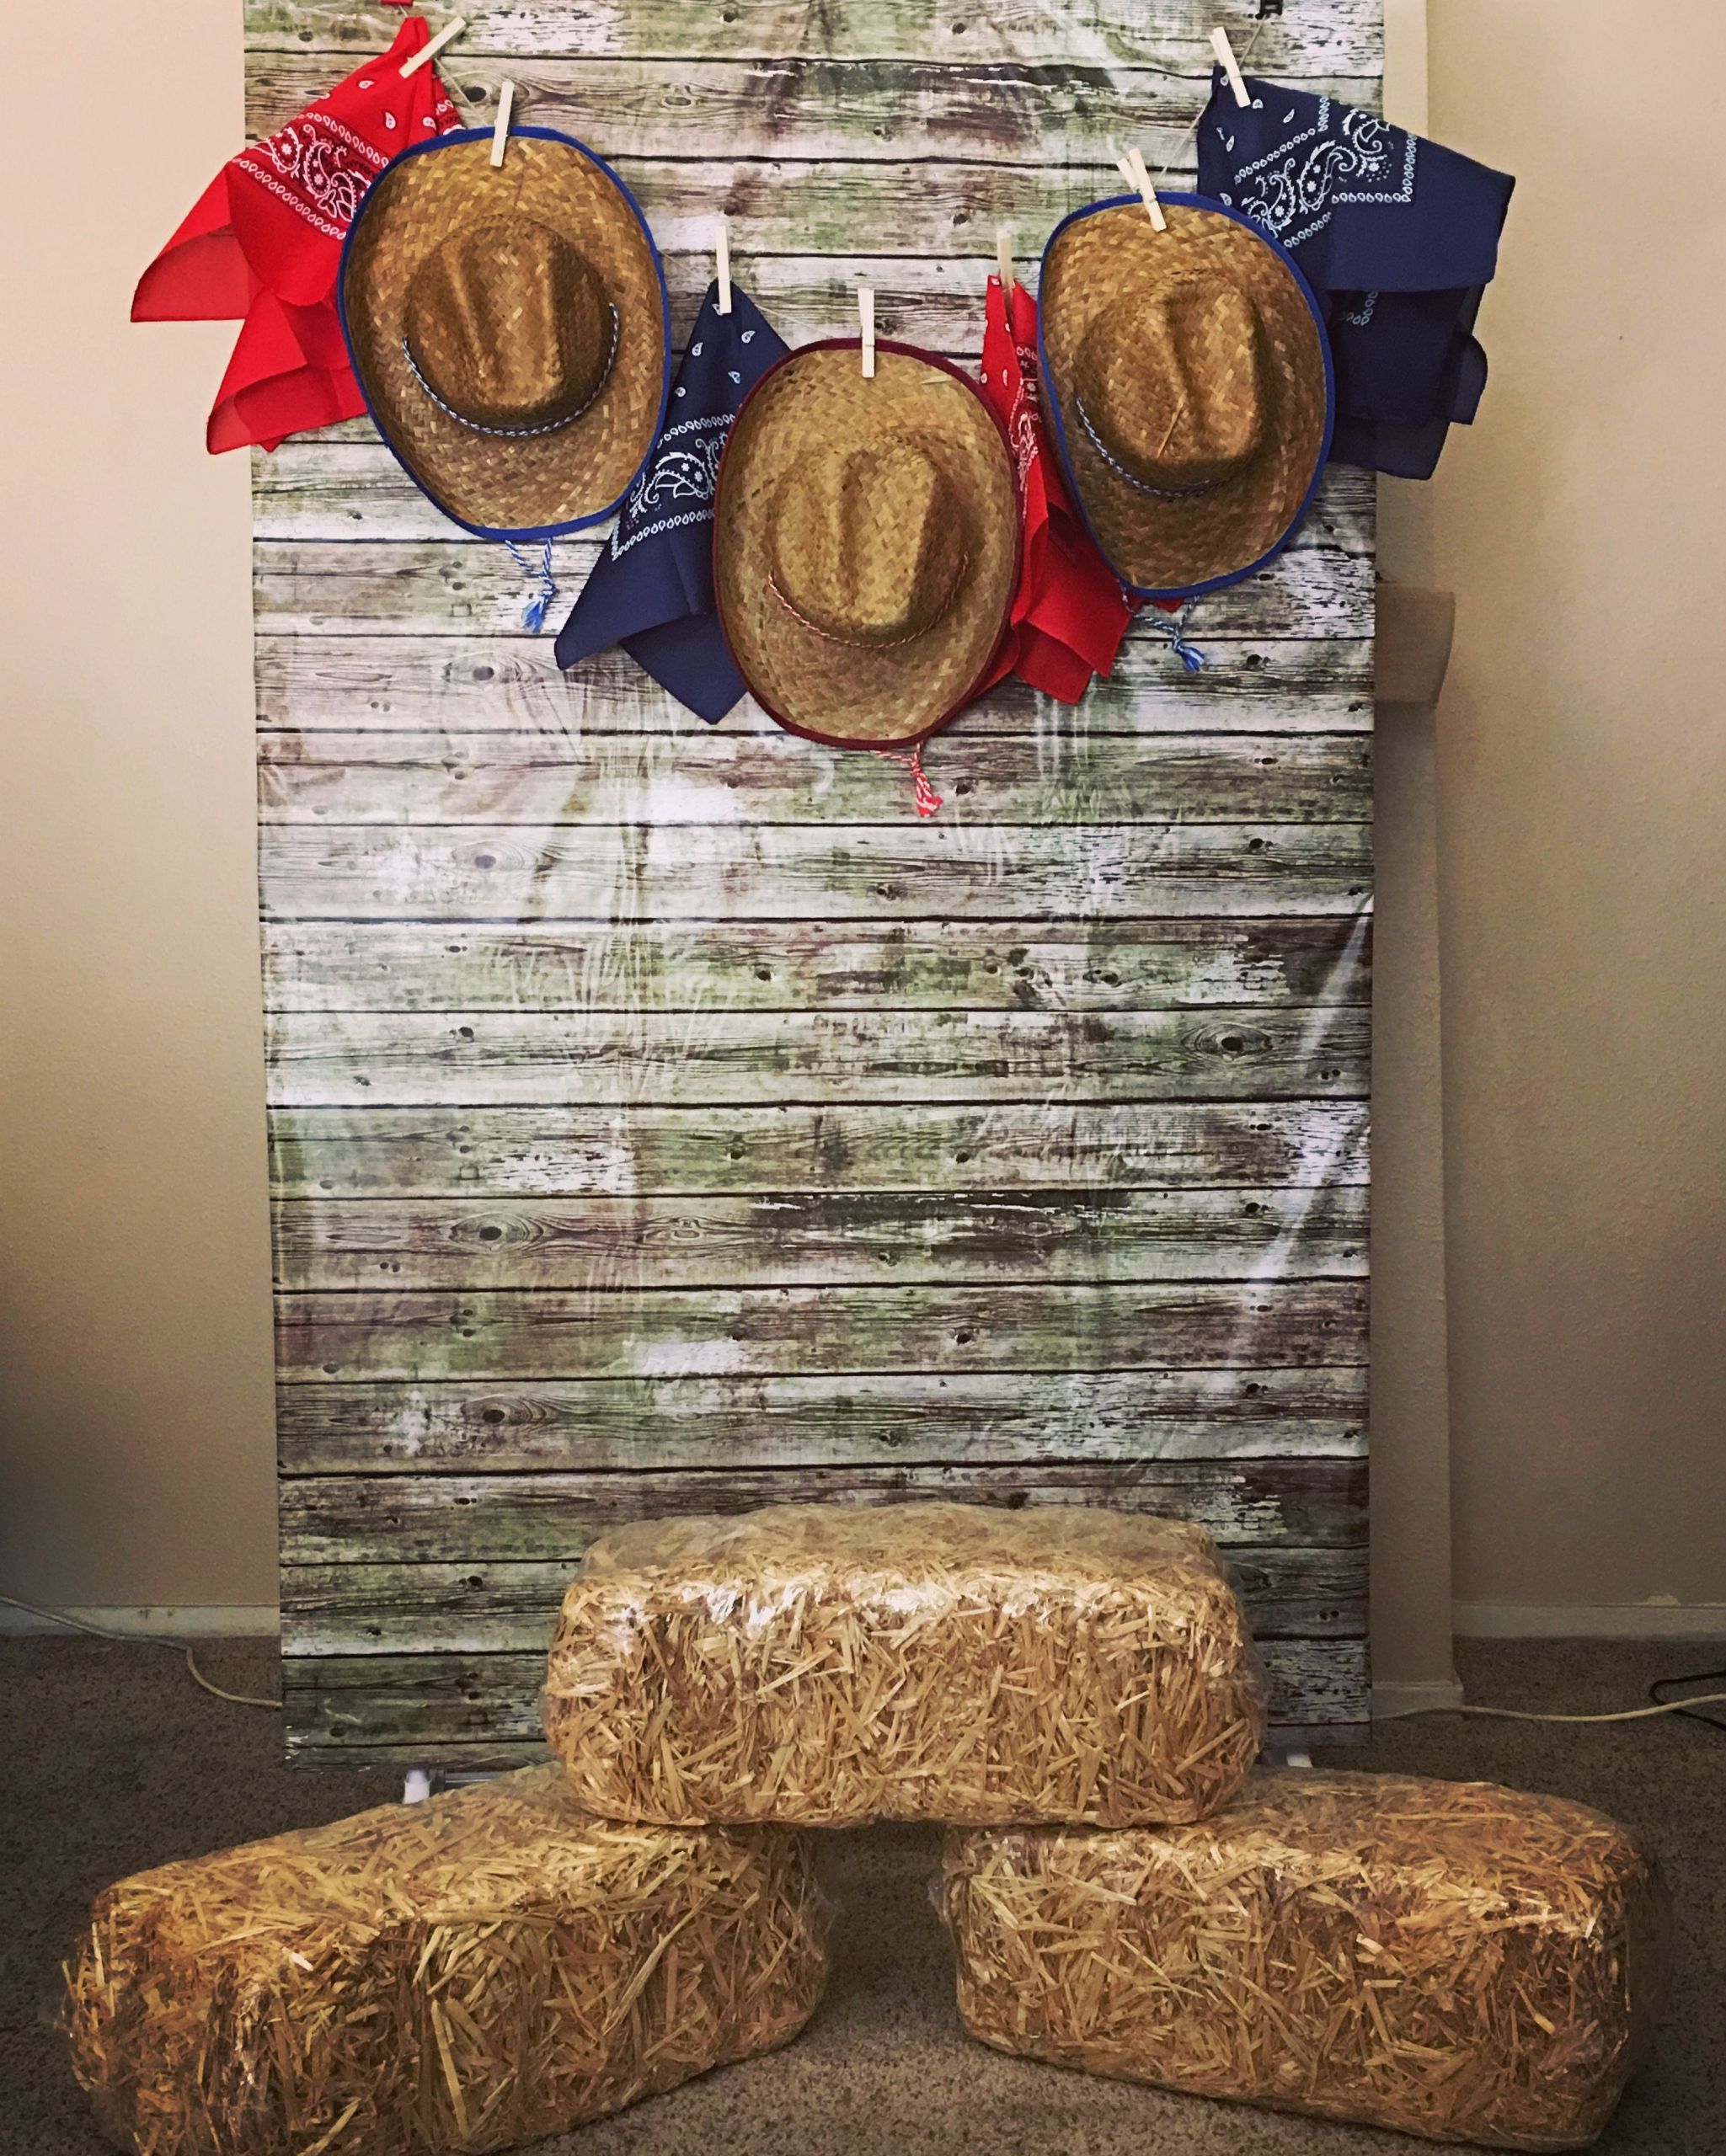 DIY Cowboy Party Decorations
 DIY backdrop out of a clothes rack and clamps